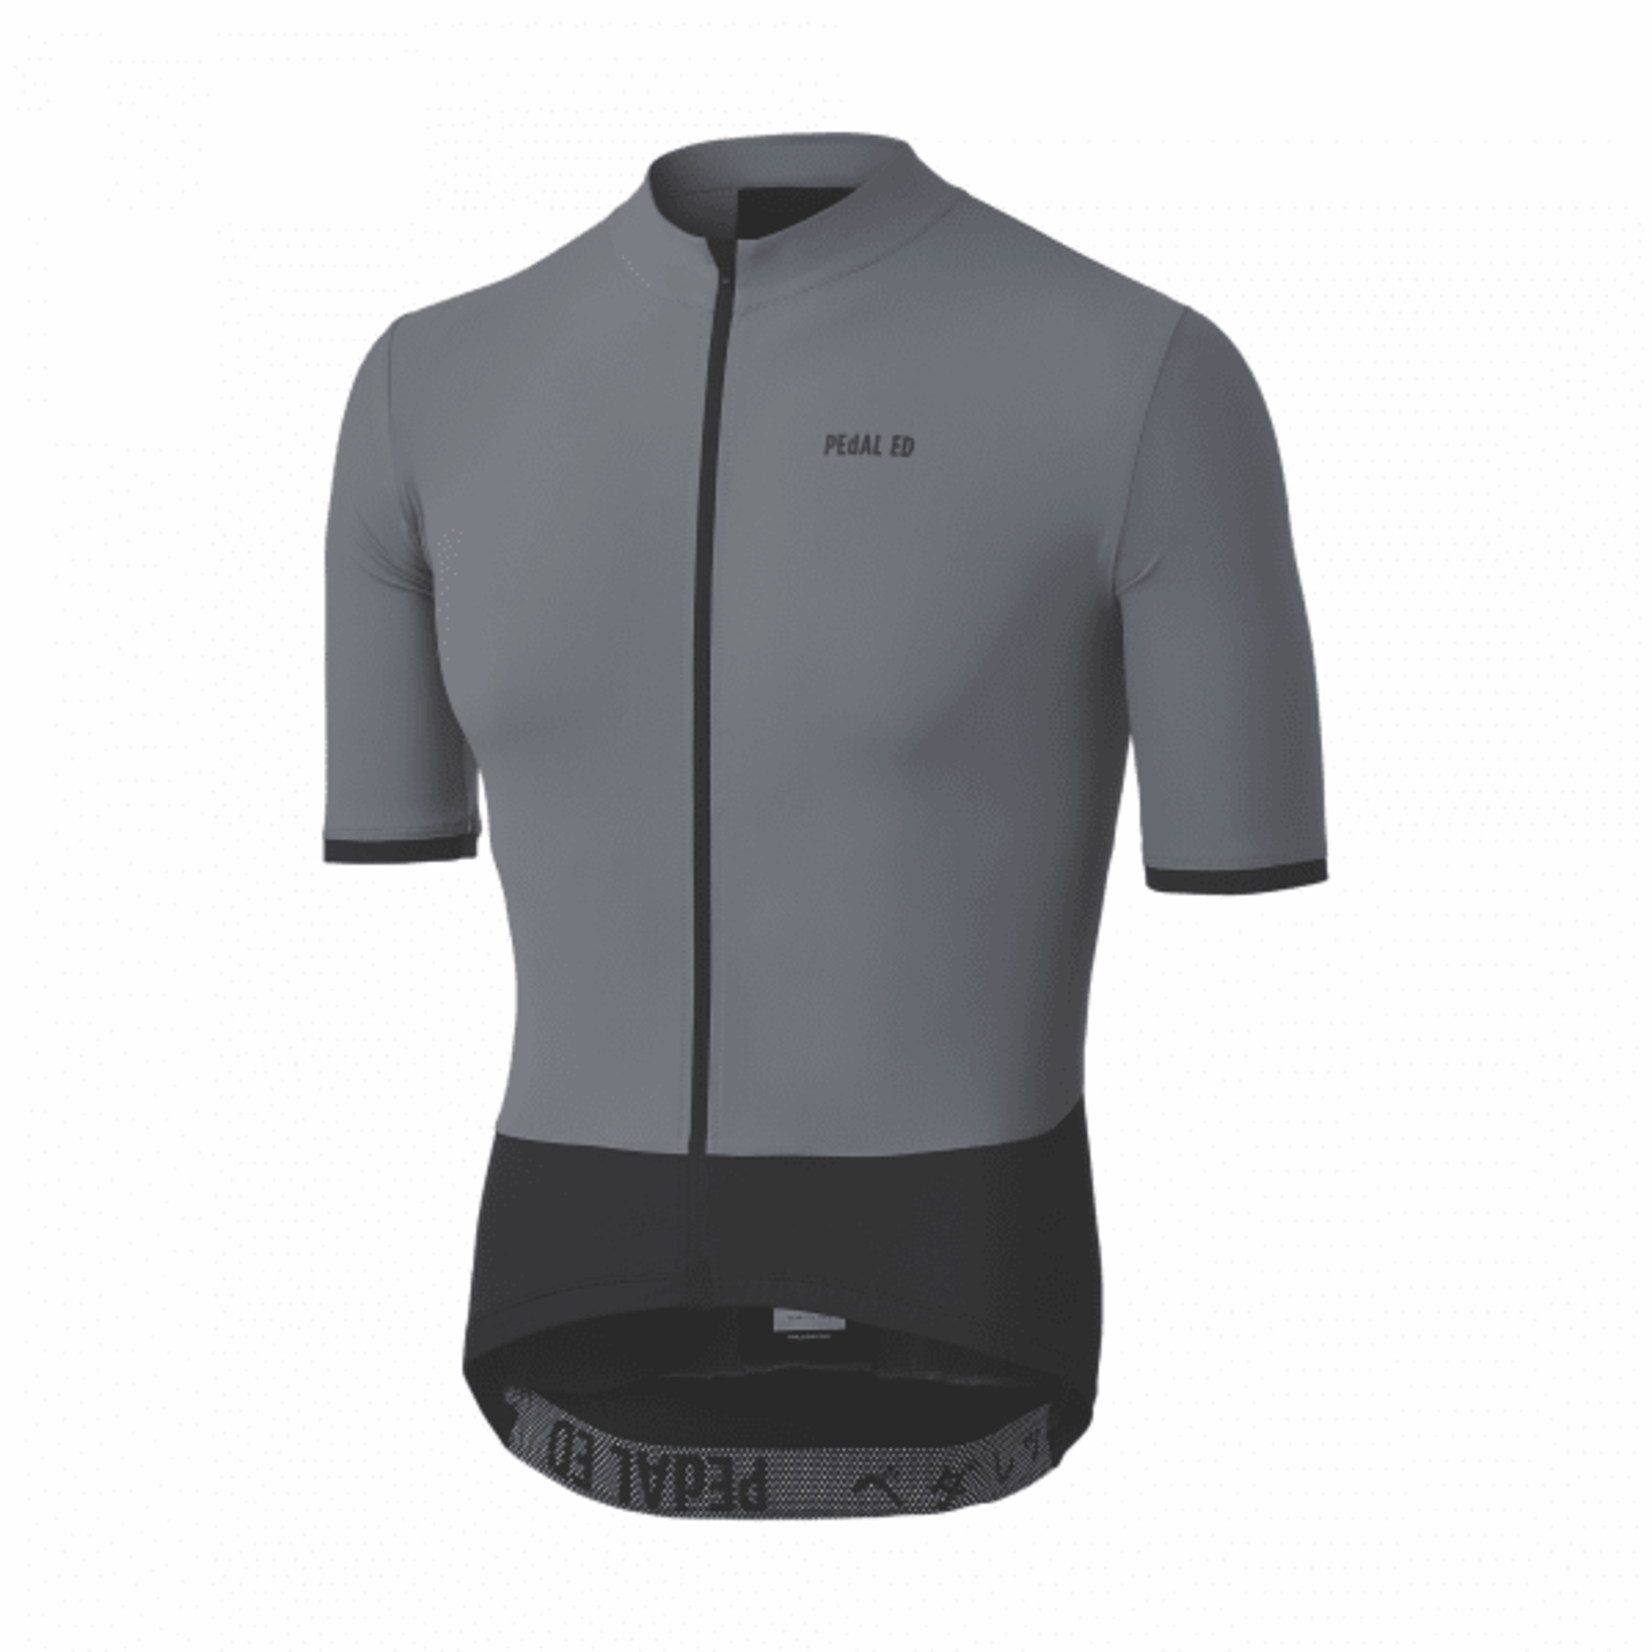 PEdALED PEdALED Heiko Jersey S grey